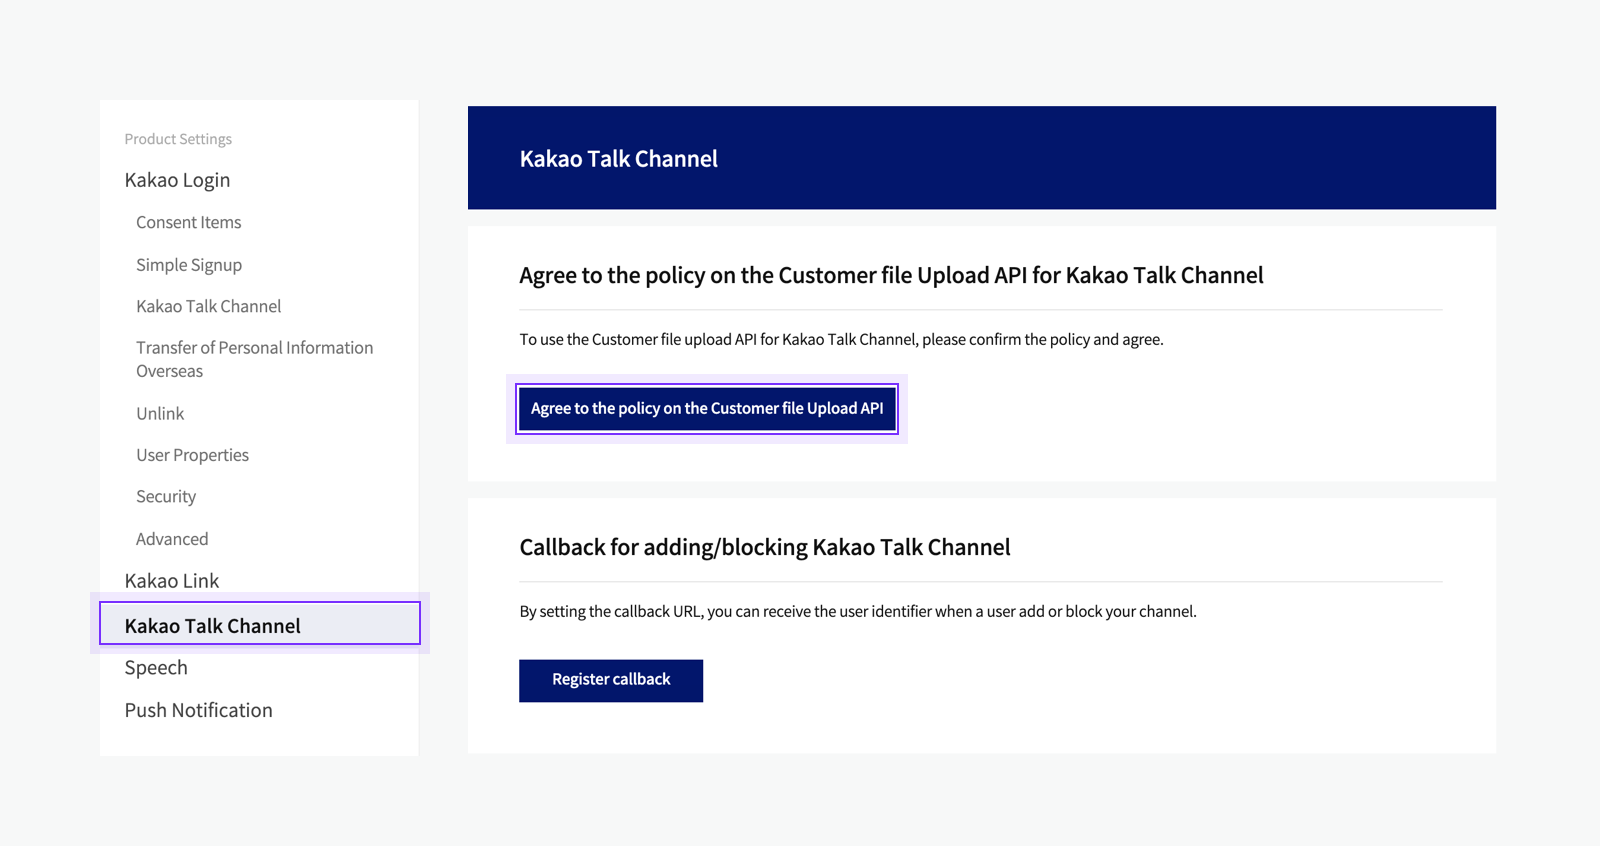 How to agree to policy on the customer file uploading API on Kakao Talk Channel page